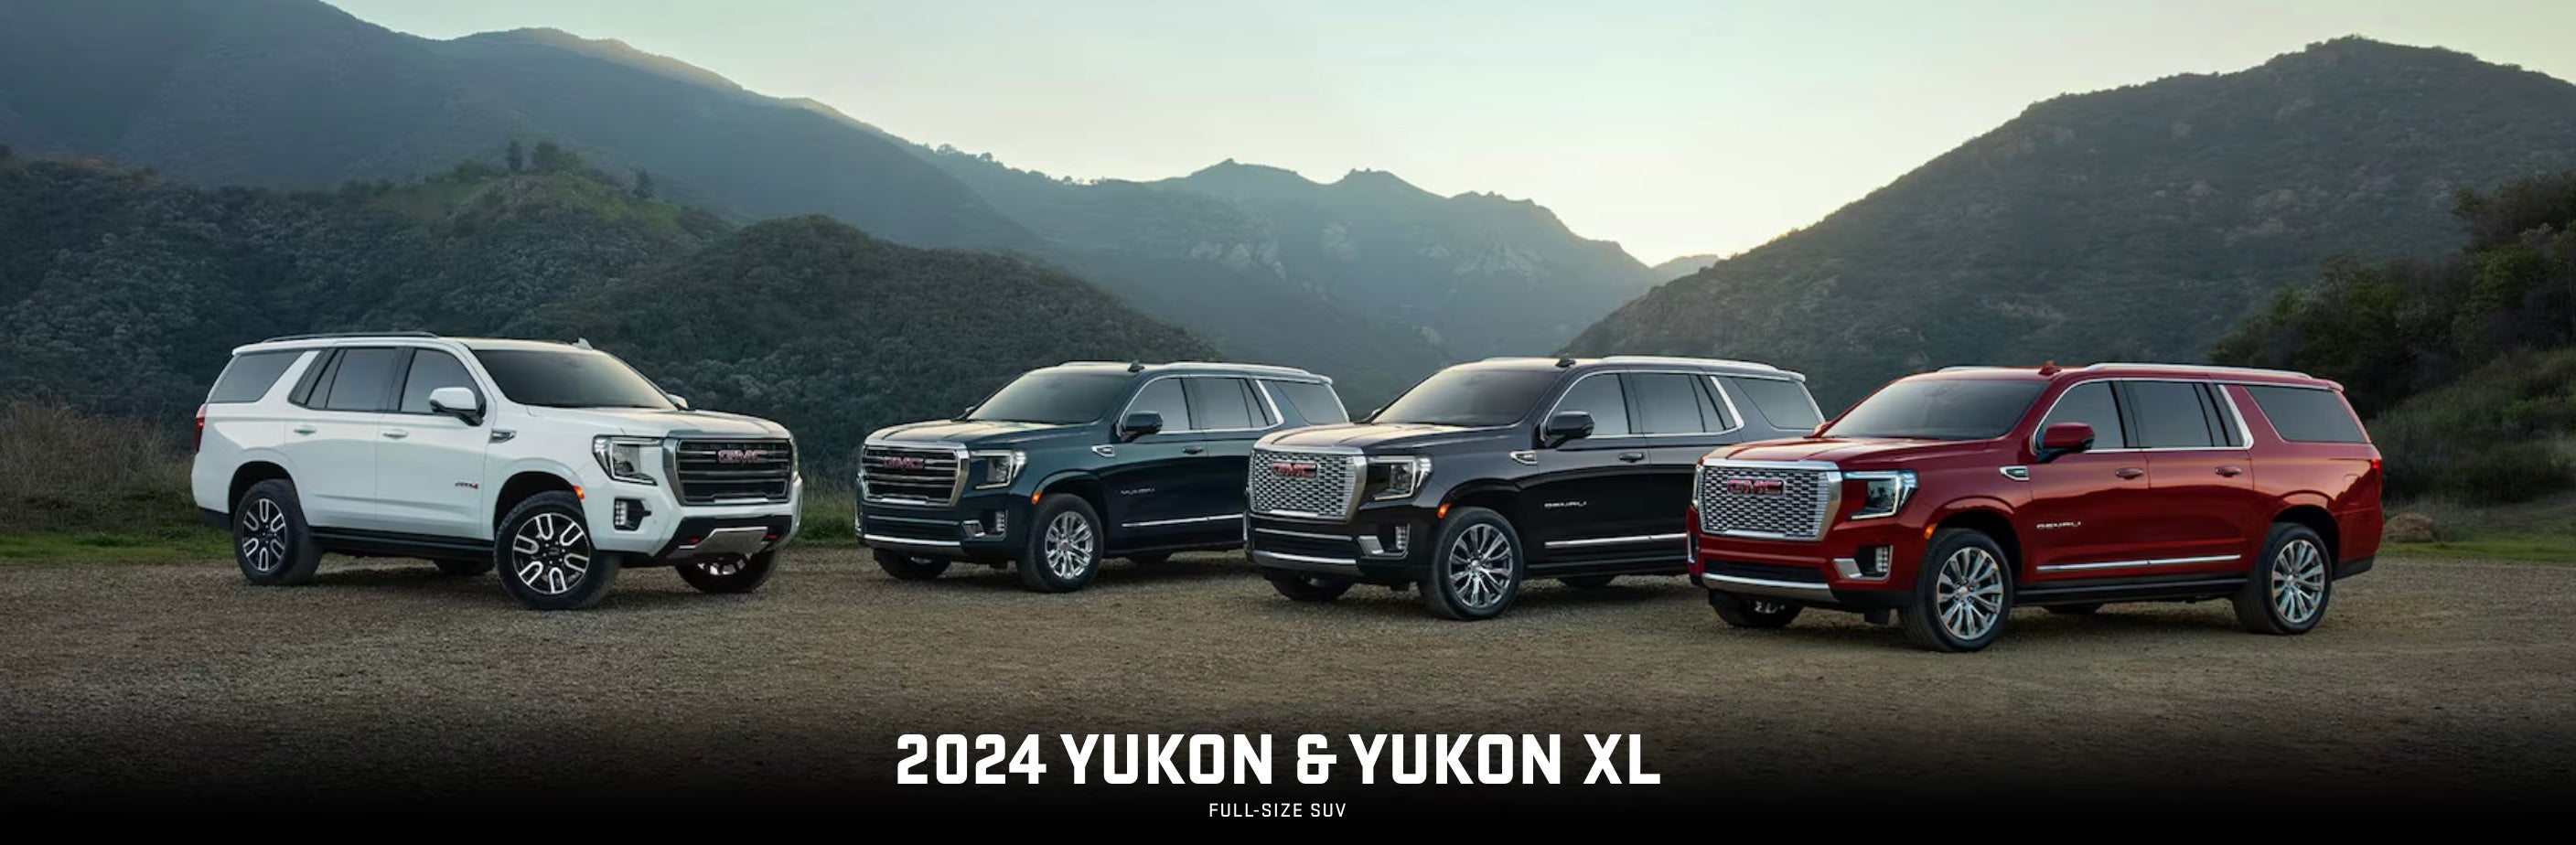 The Yukon and Yukon XL SUV models from GMC for sale at Lou Bachrodt Auto Mall in Rockford, IL